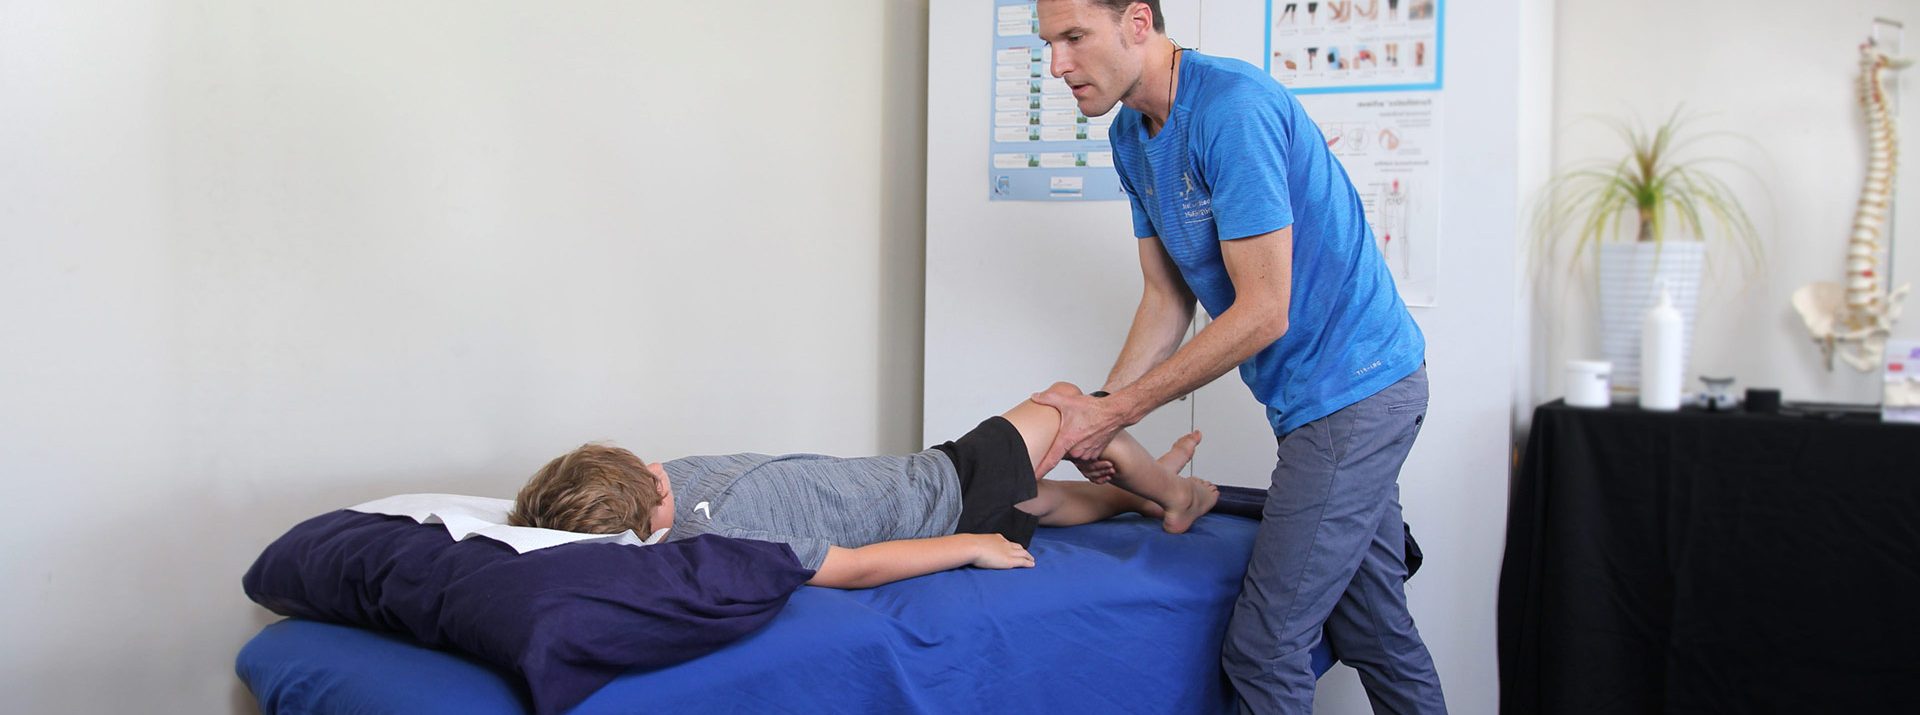 Experienced, friendly physiotherapists